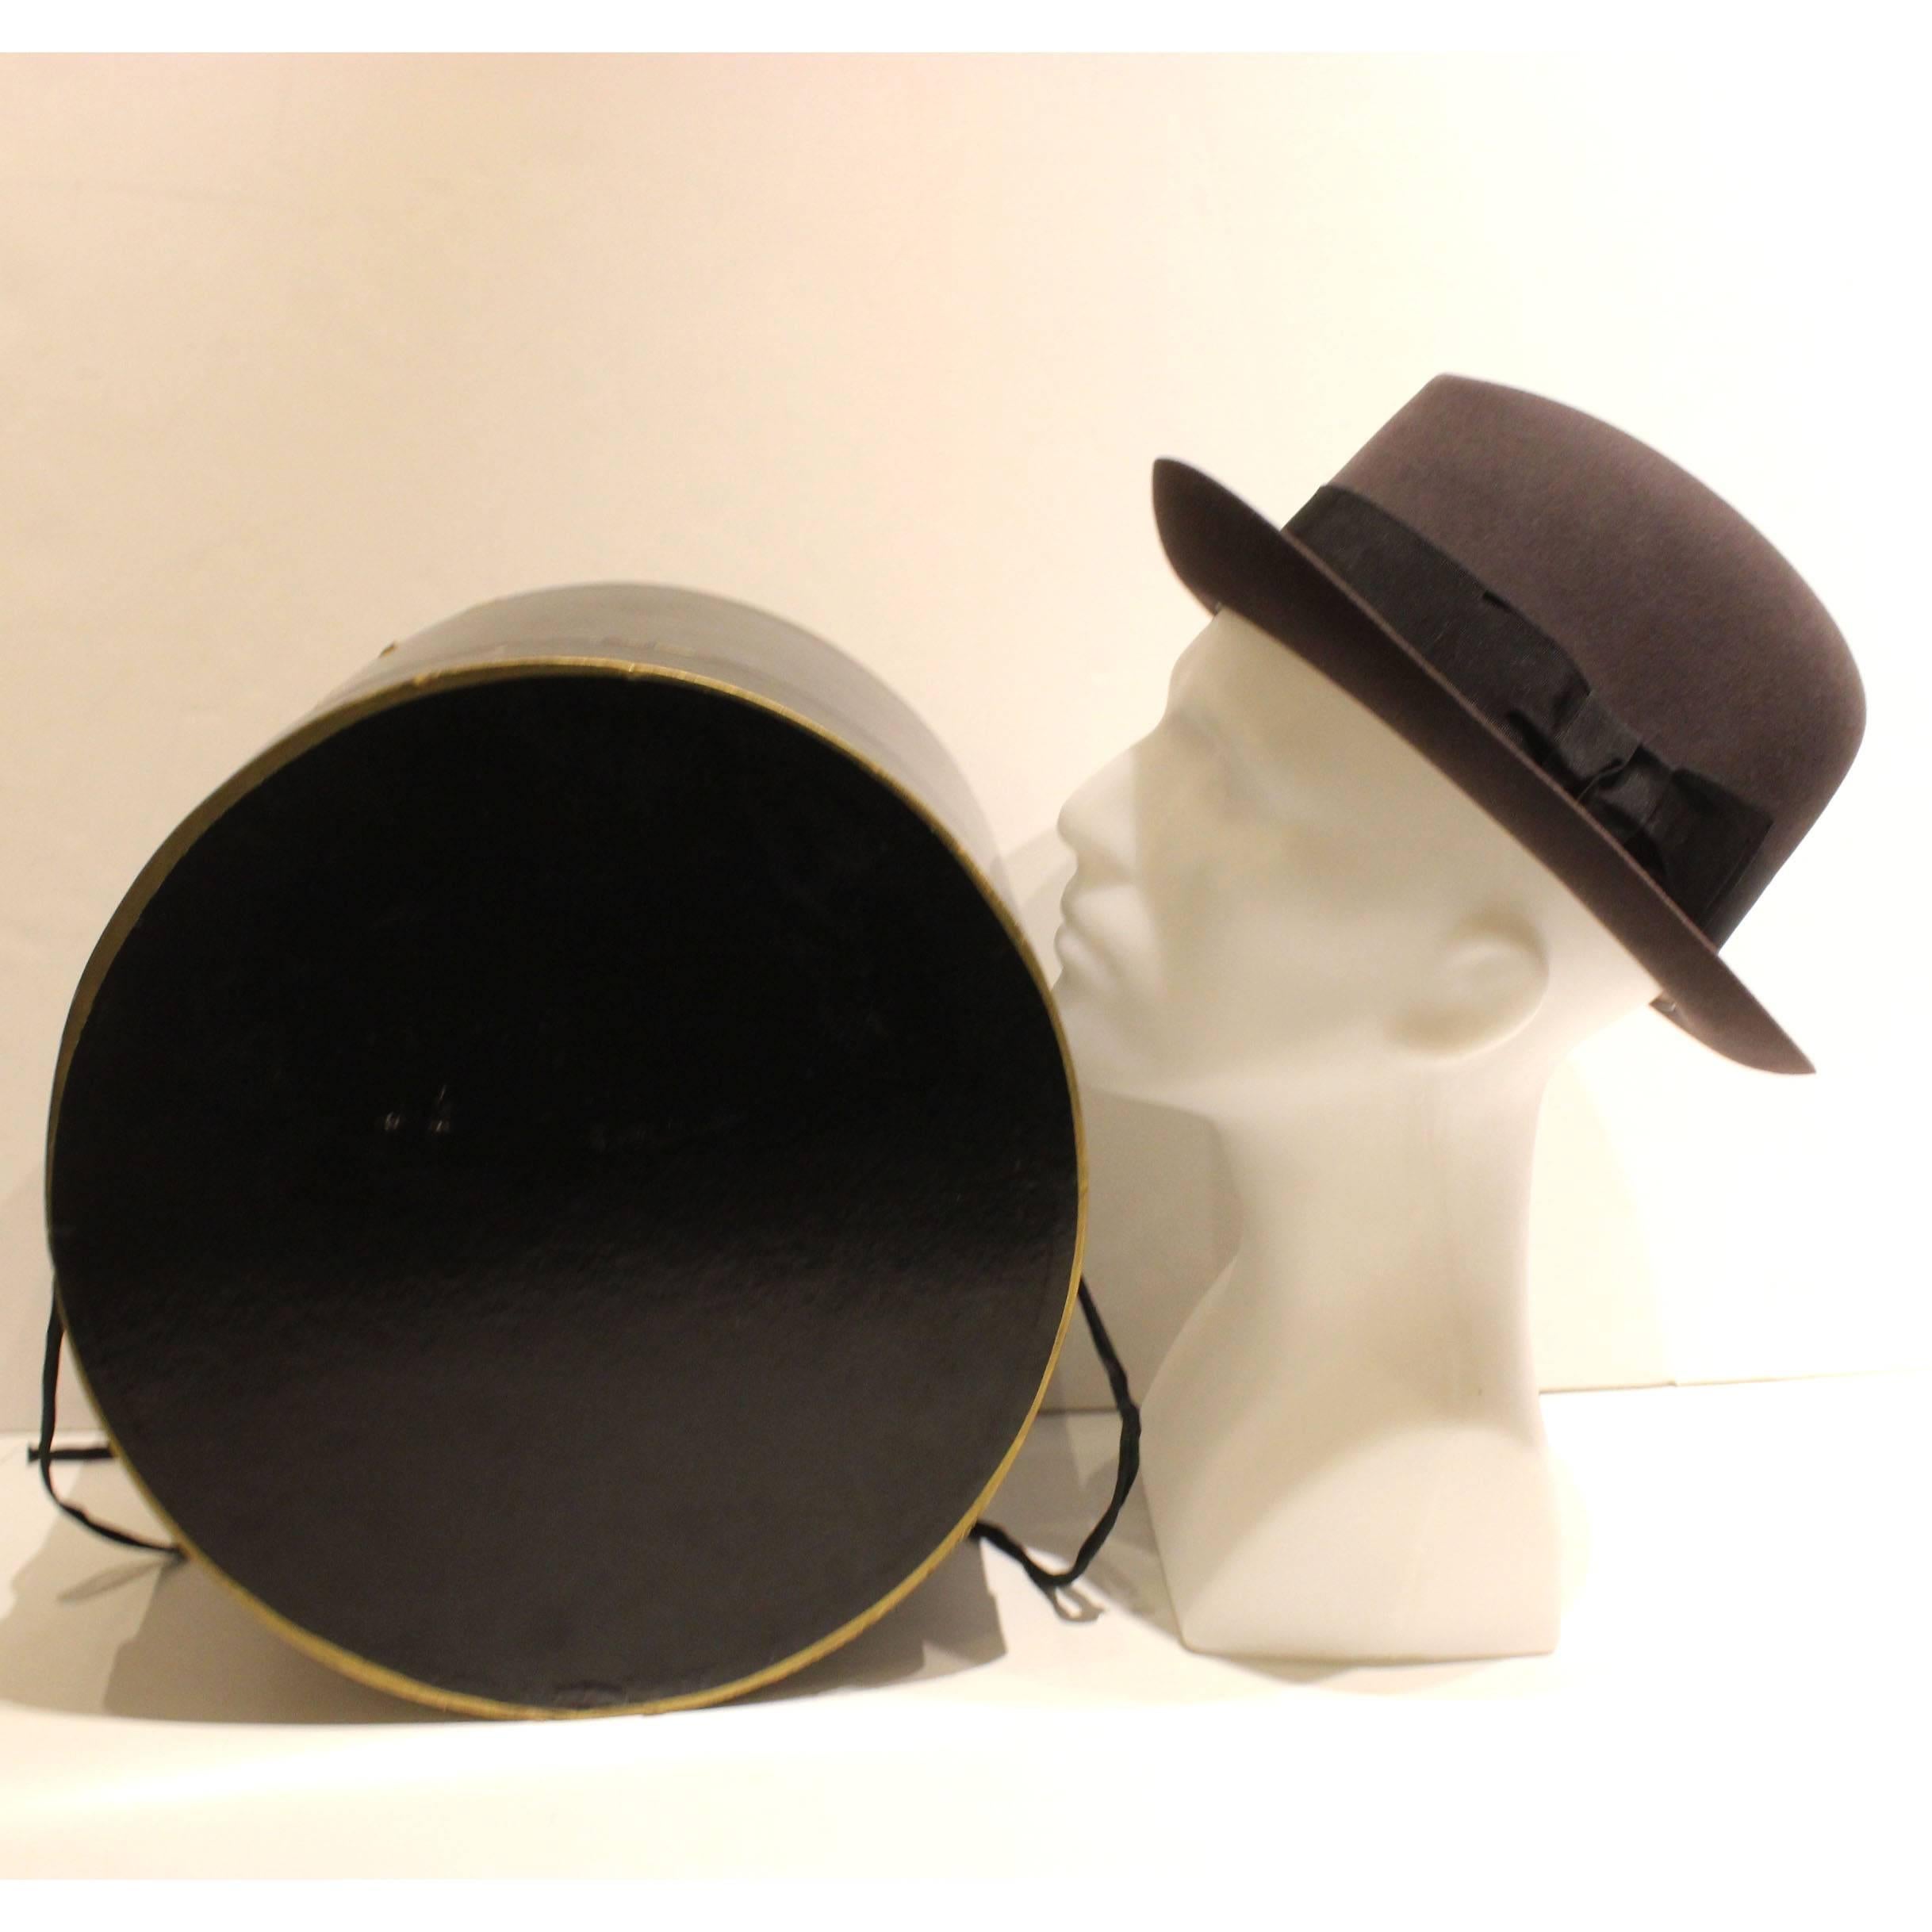 This 40's style charcoal grey fedora with a black ribbon is made by Lock & Co Hatters, one of the oldest hat stores in the world. Lock & Co Hatters, St. James Street London was established in 1759. The brim is 2.55